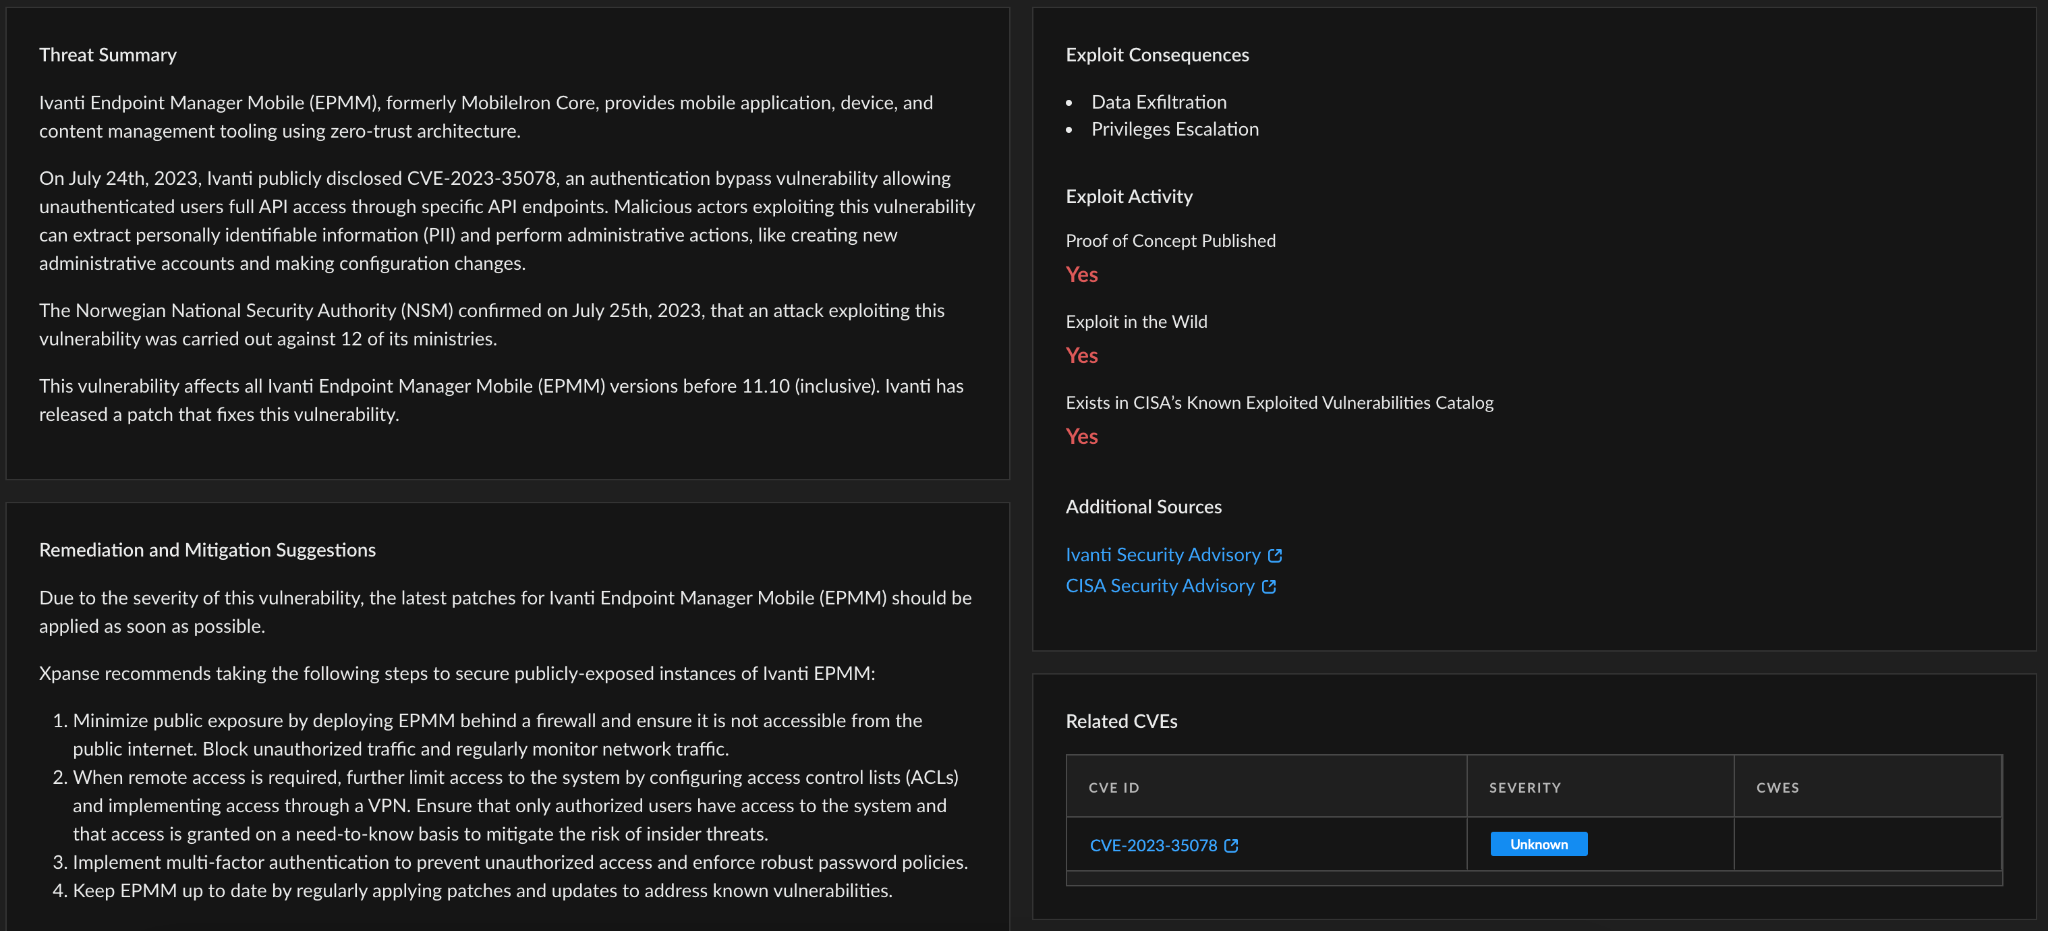 Image 4 is a screenshot of the Cortex Xpanse interface that lists the threat summary for CVE-2023-35078, including remediation and mediation, suggestions, and the exploit consequences. It also has a table of related CVEs.